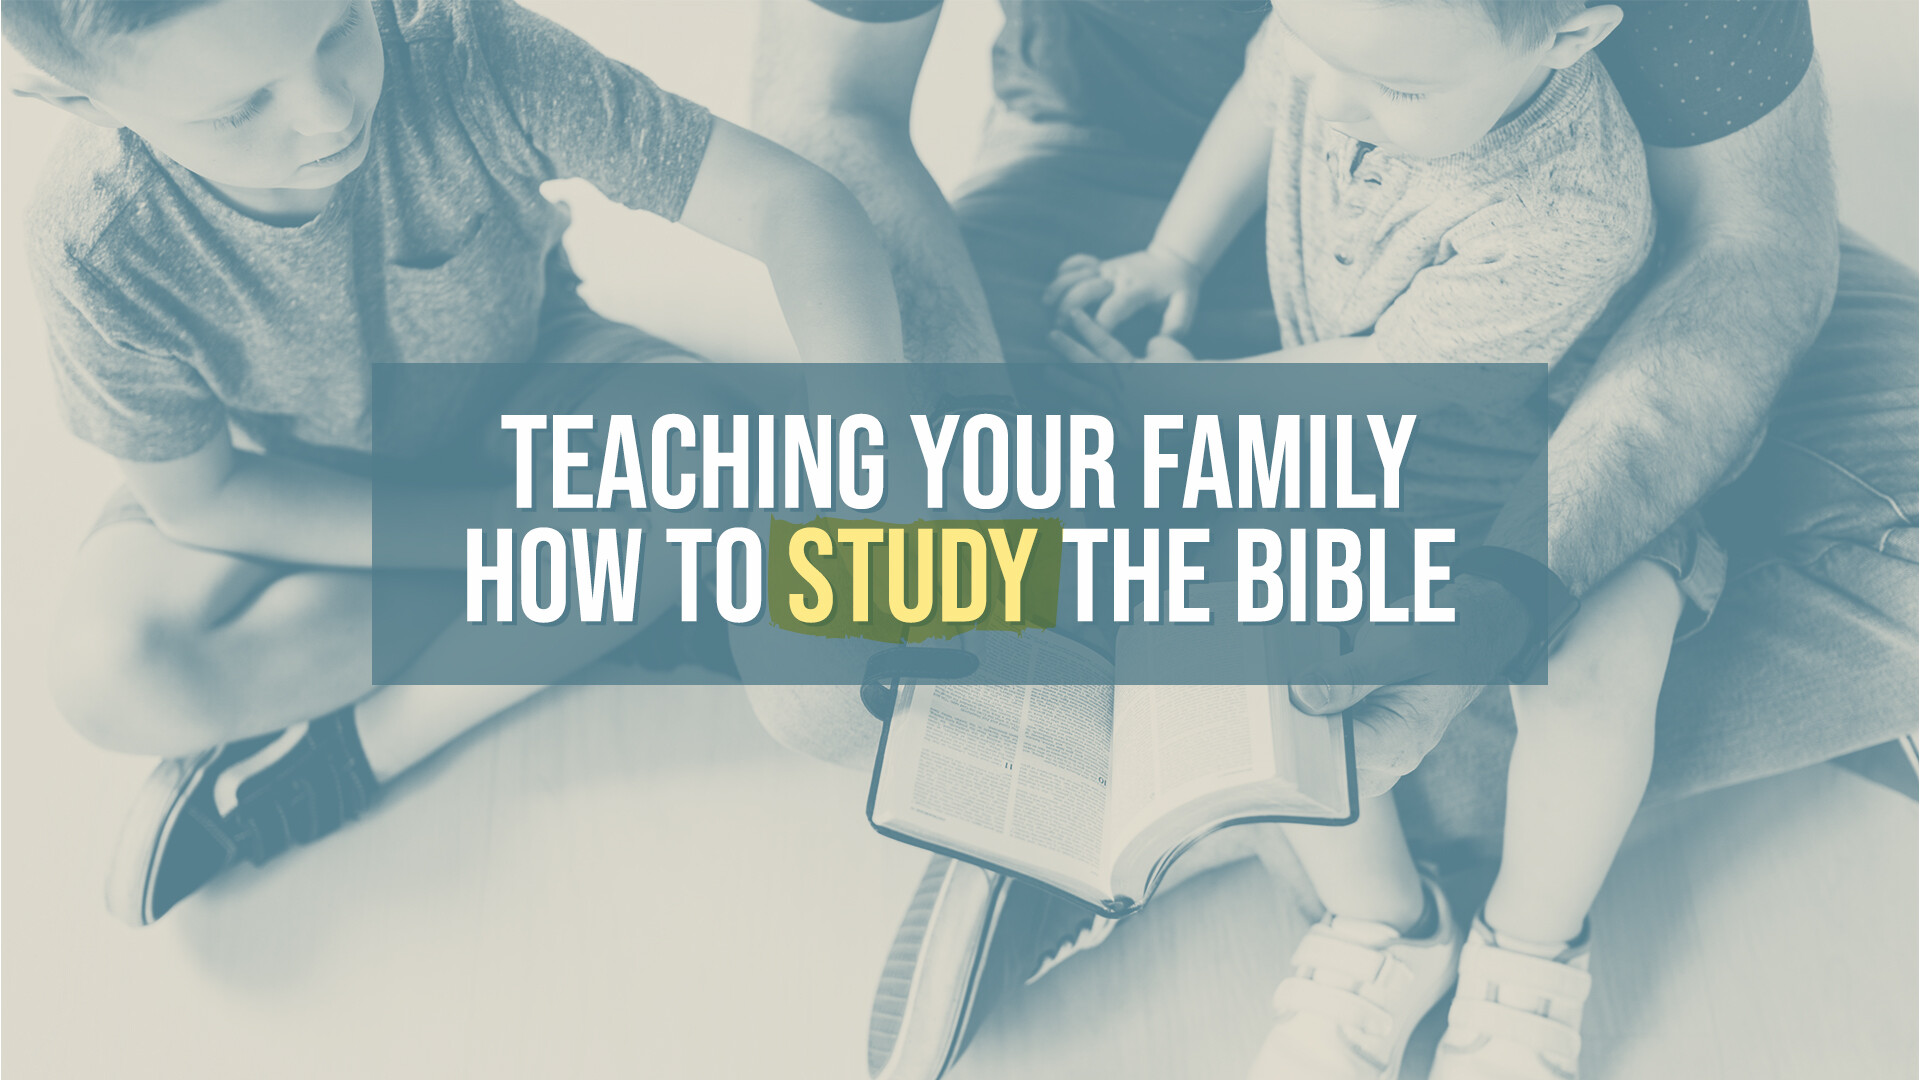 Teaching Your Family How to Study the Bible